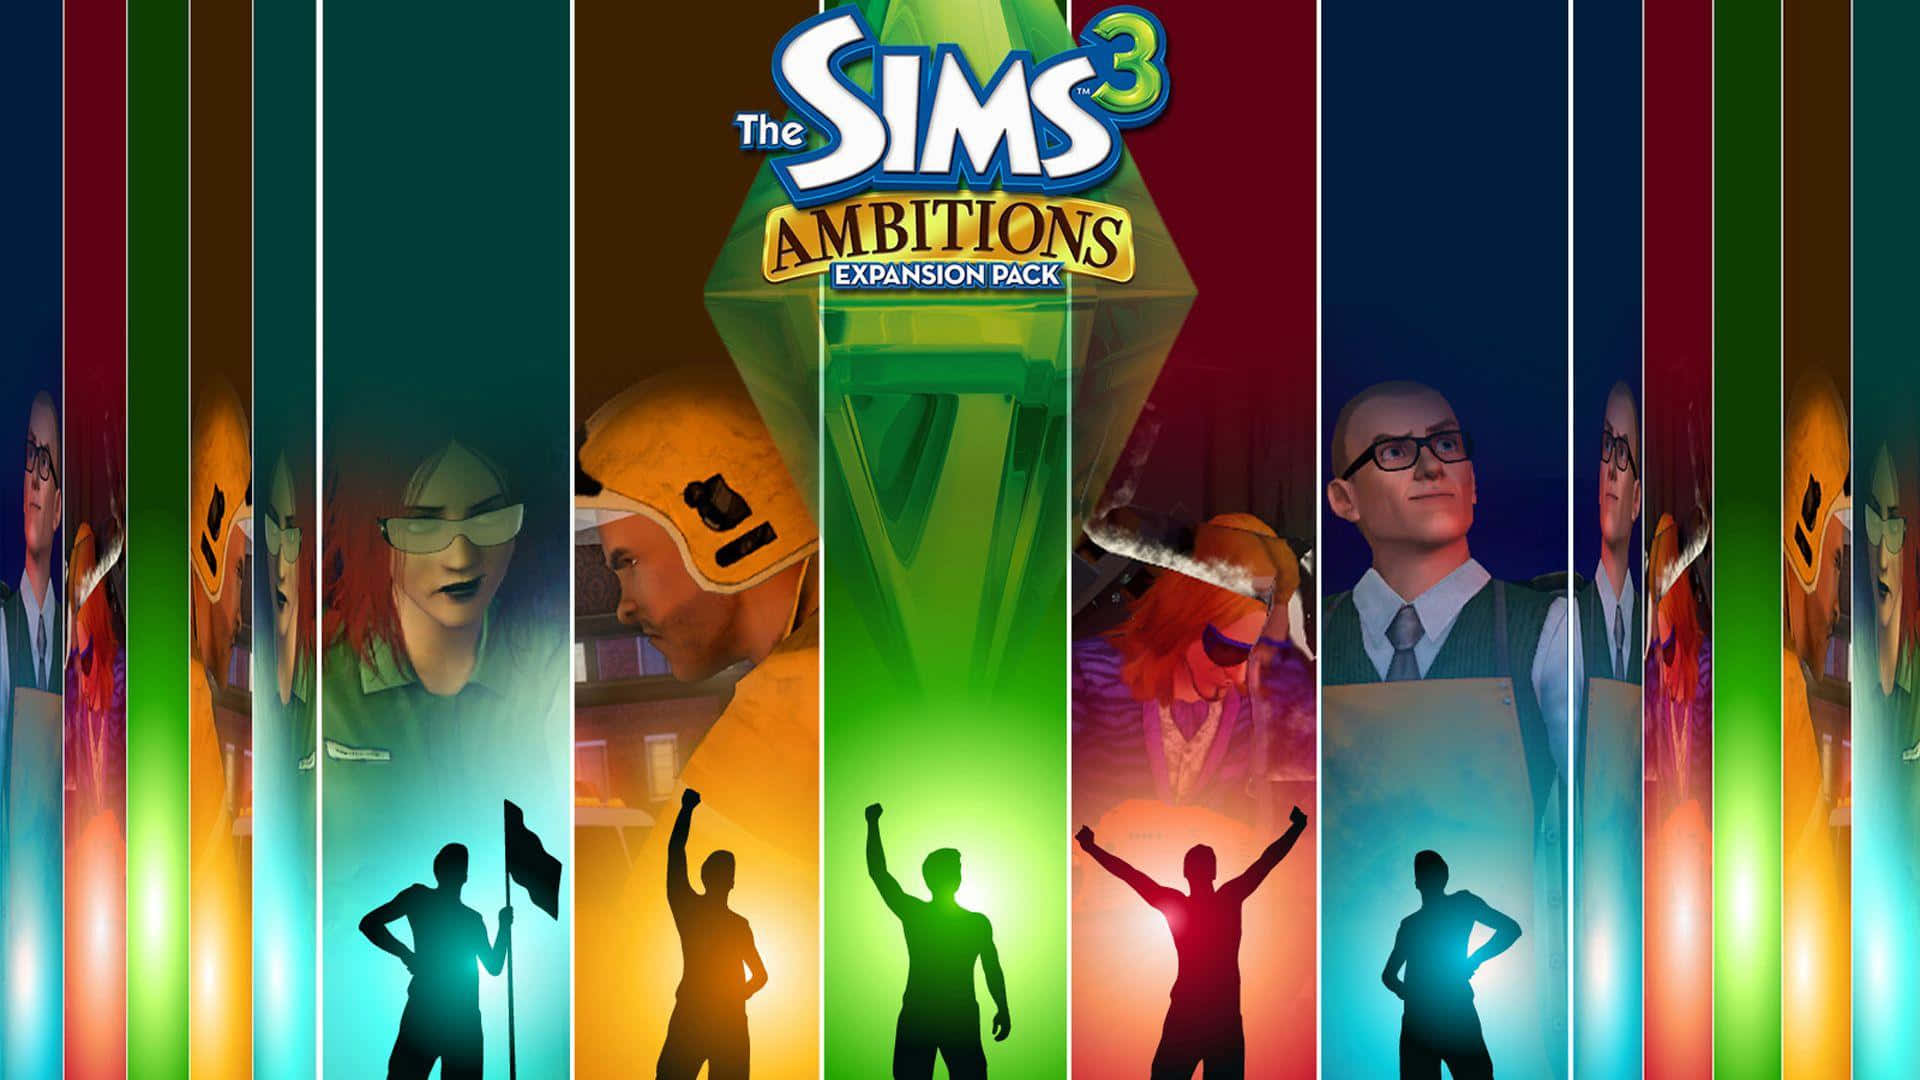 The Sims 3 1920 X 1080 Wallpaper